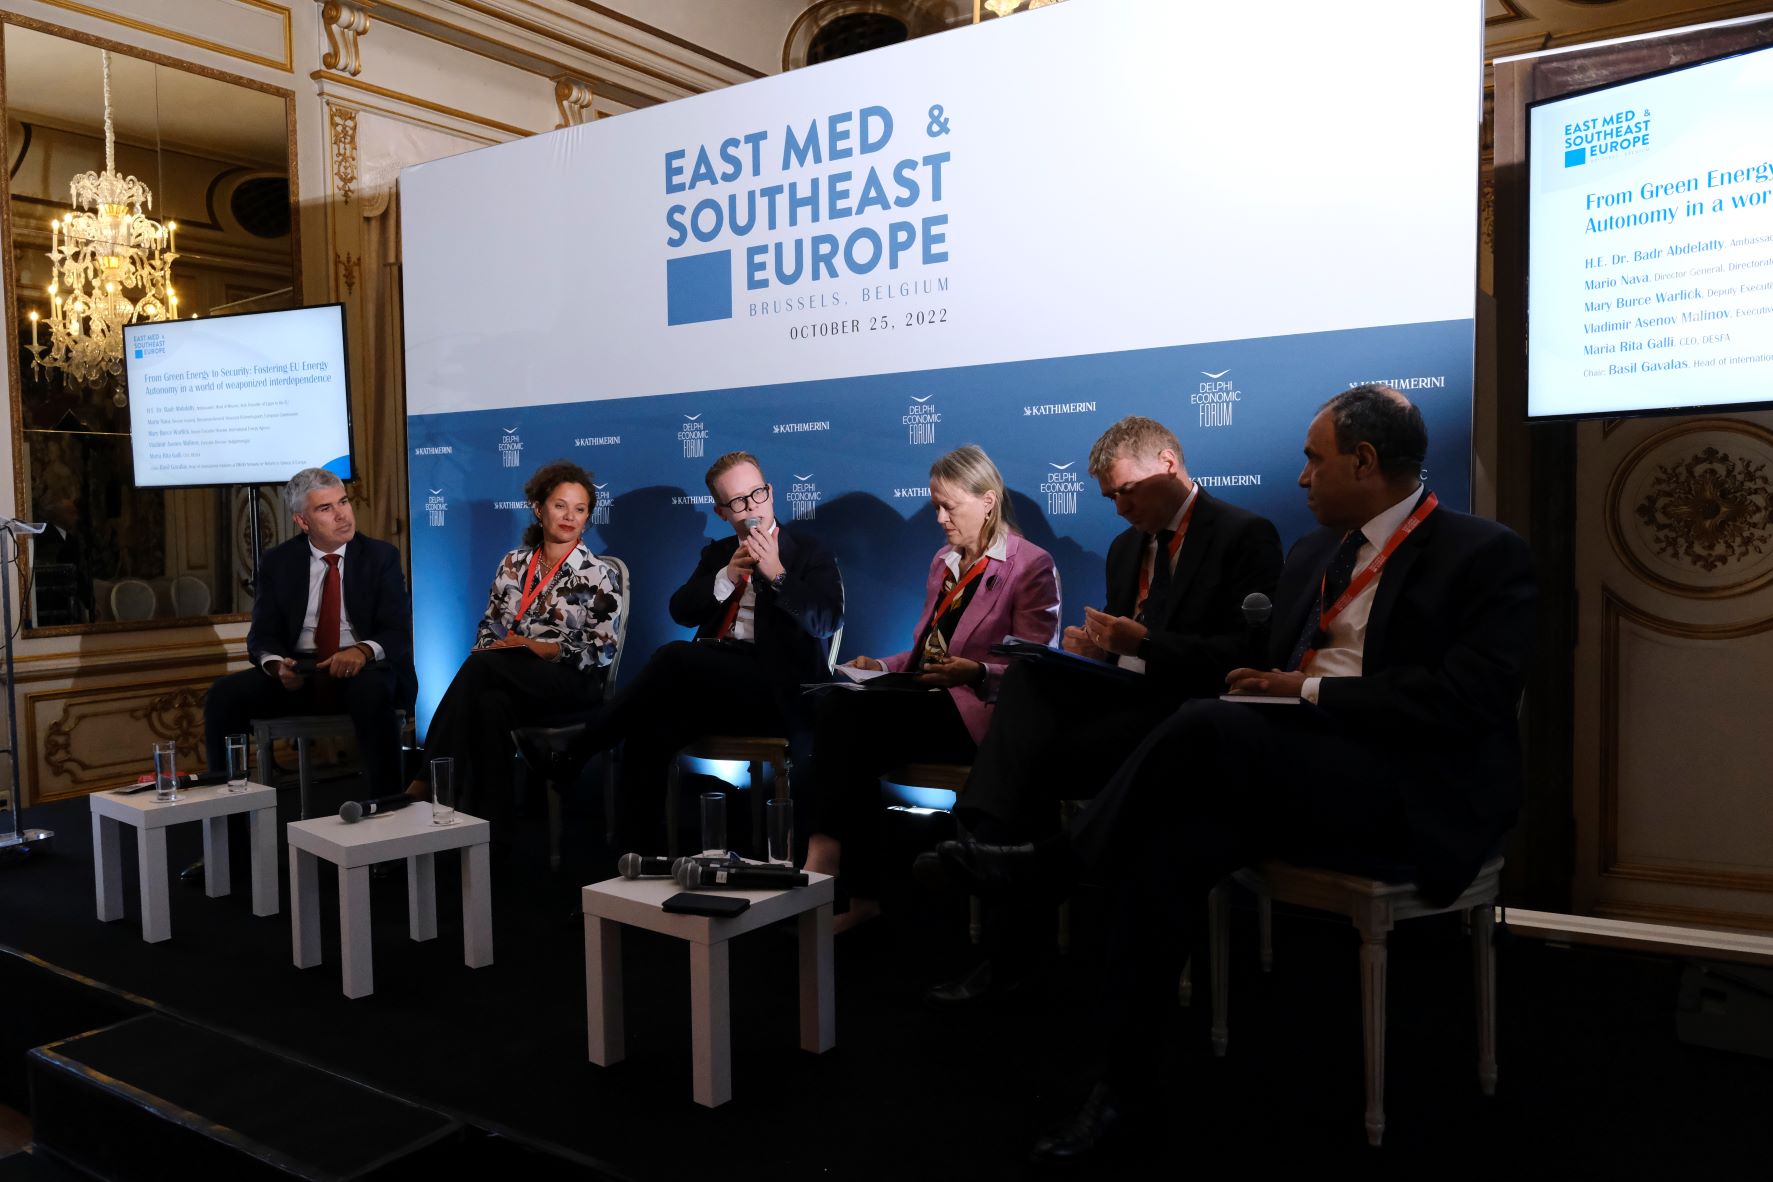 East Med & Southeast Europe: The urgent need for EU energy diversification